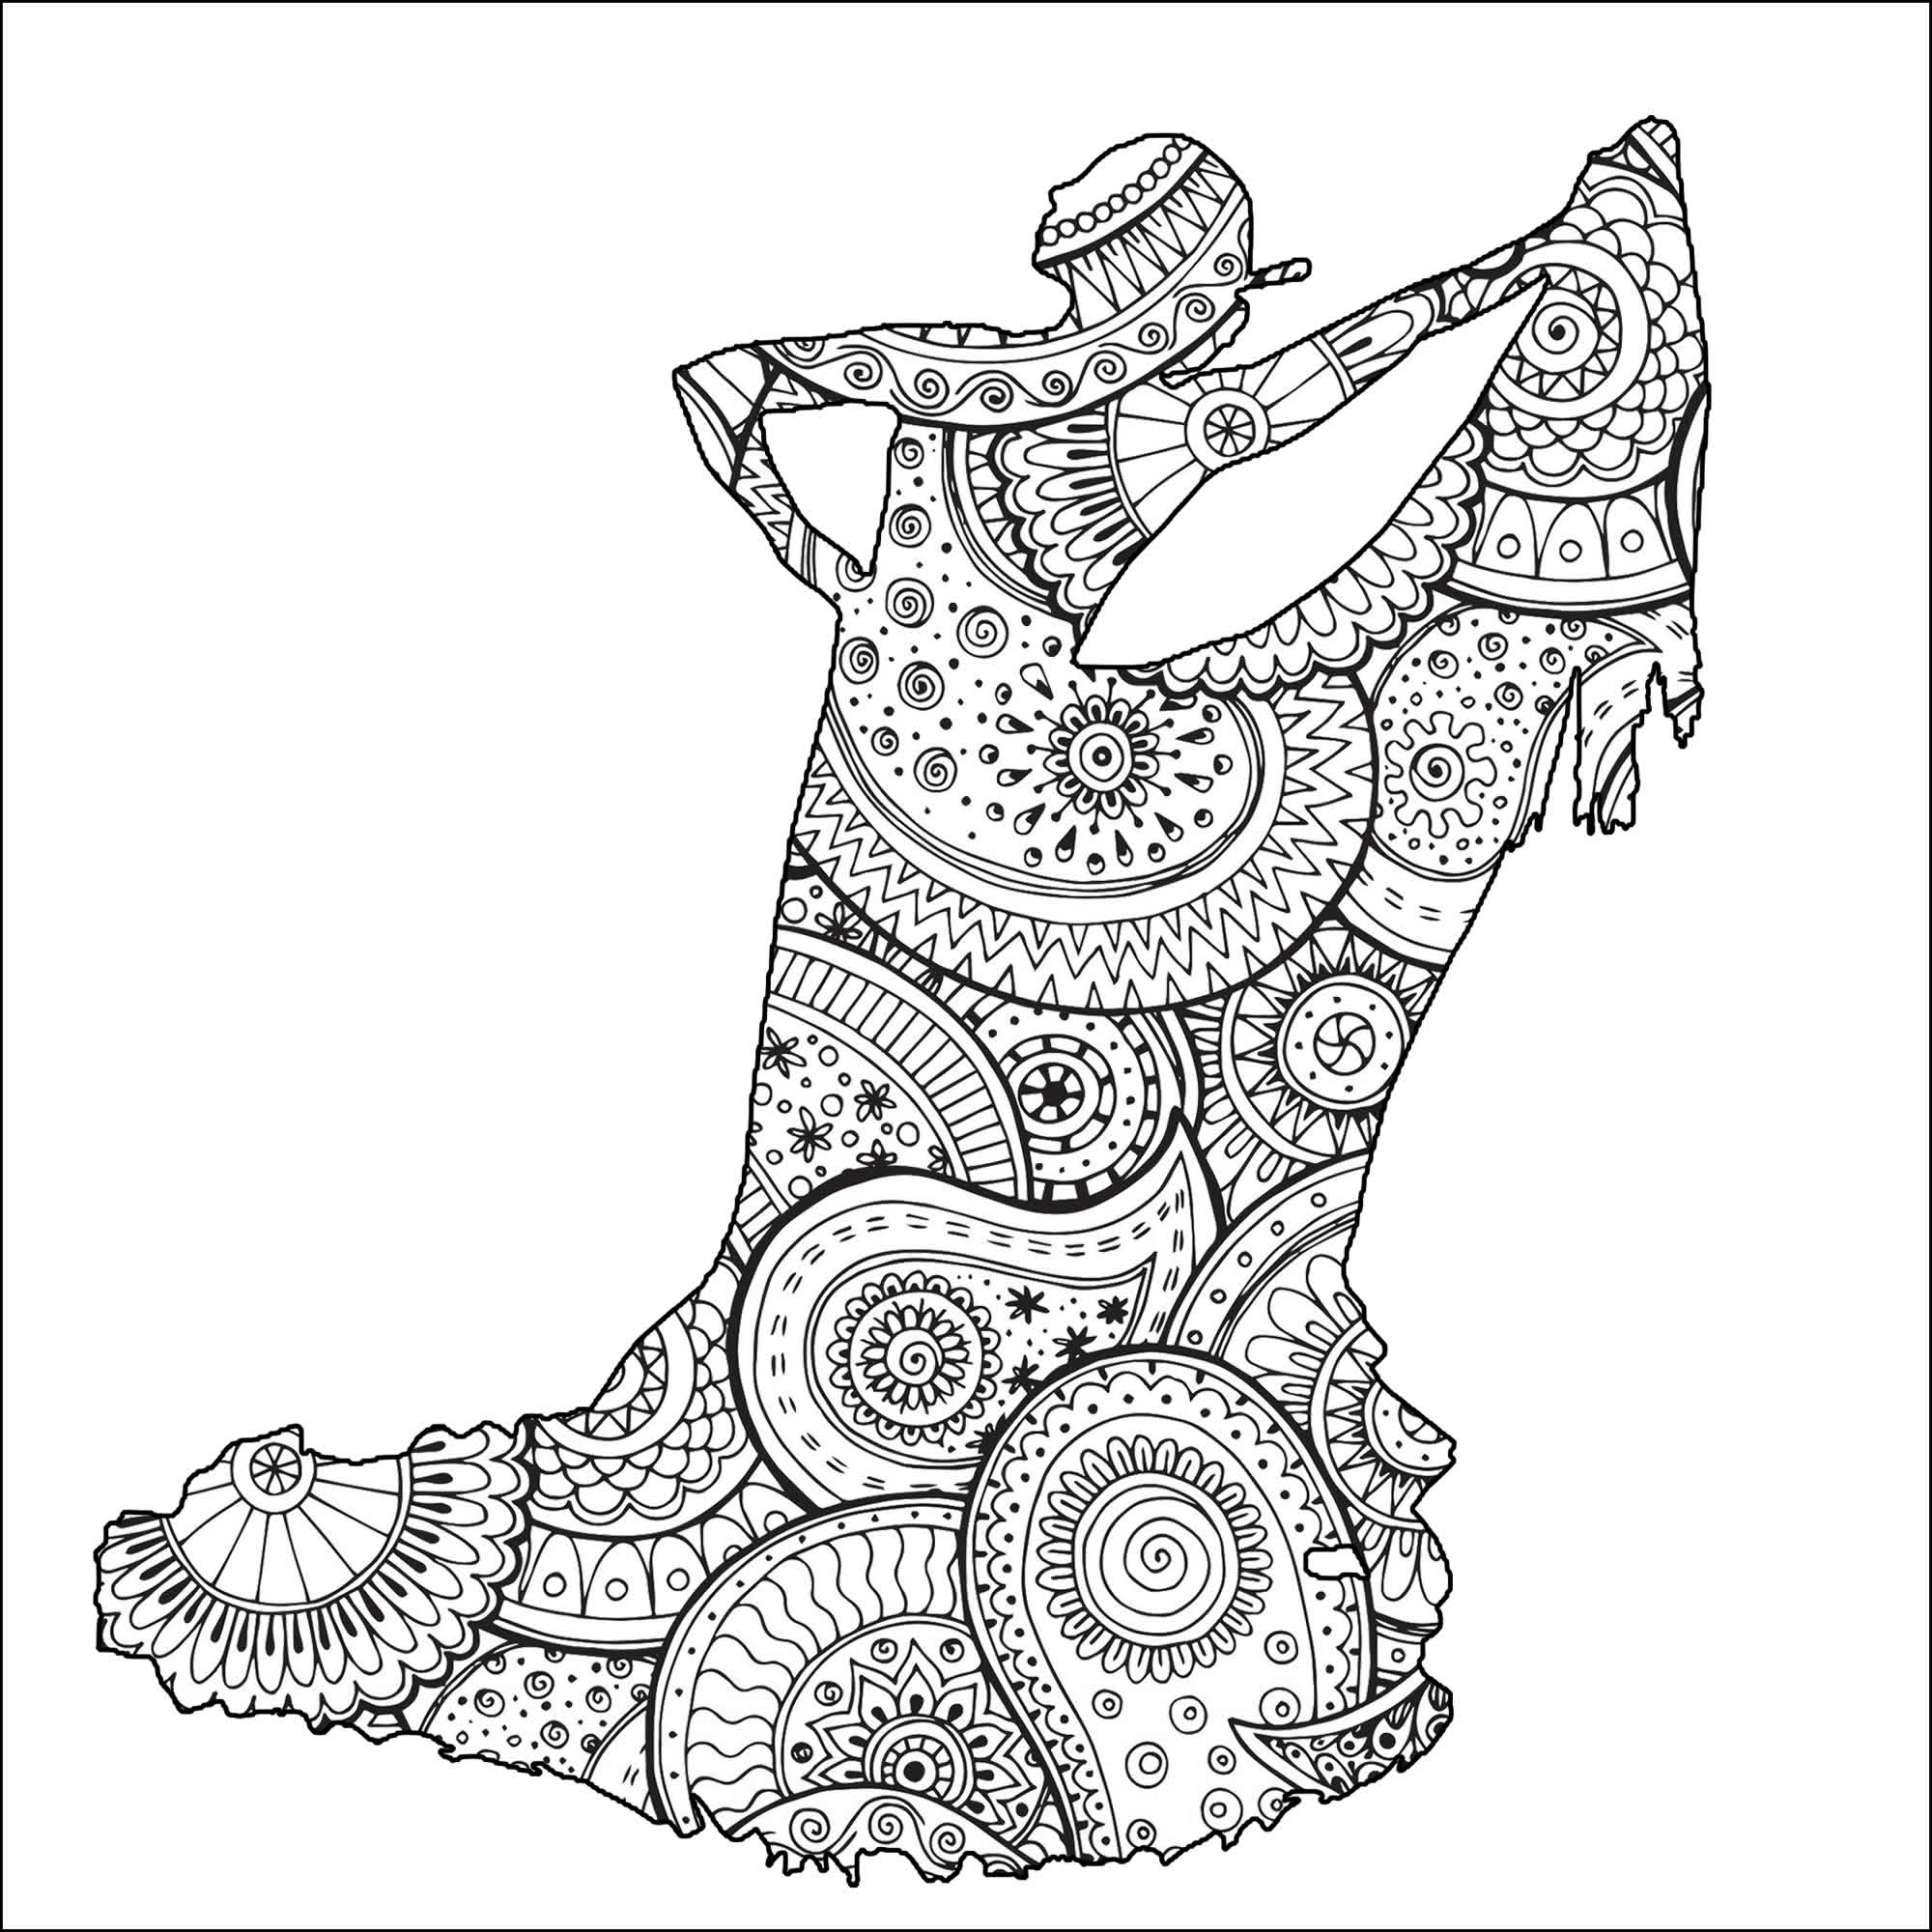 Beautiful female flamenco dancer shape with Zentangle and paisley patterns, Artist : Art. Isabelle